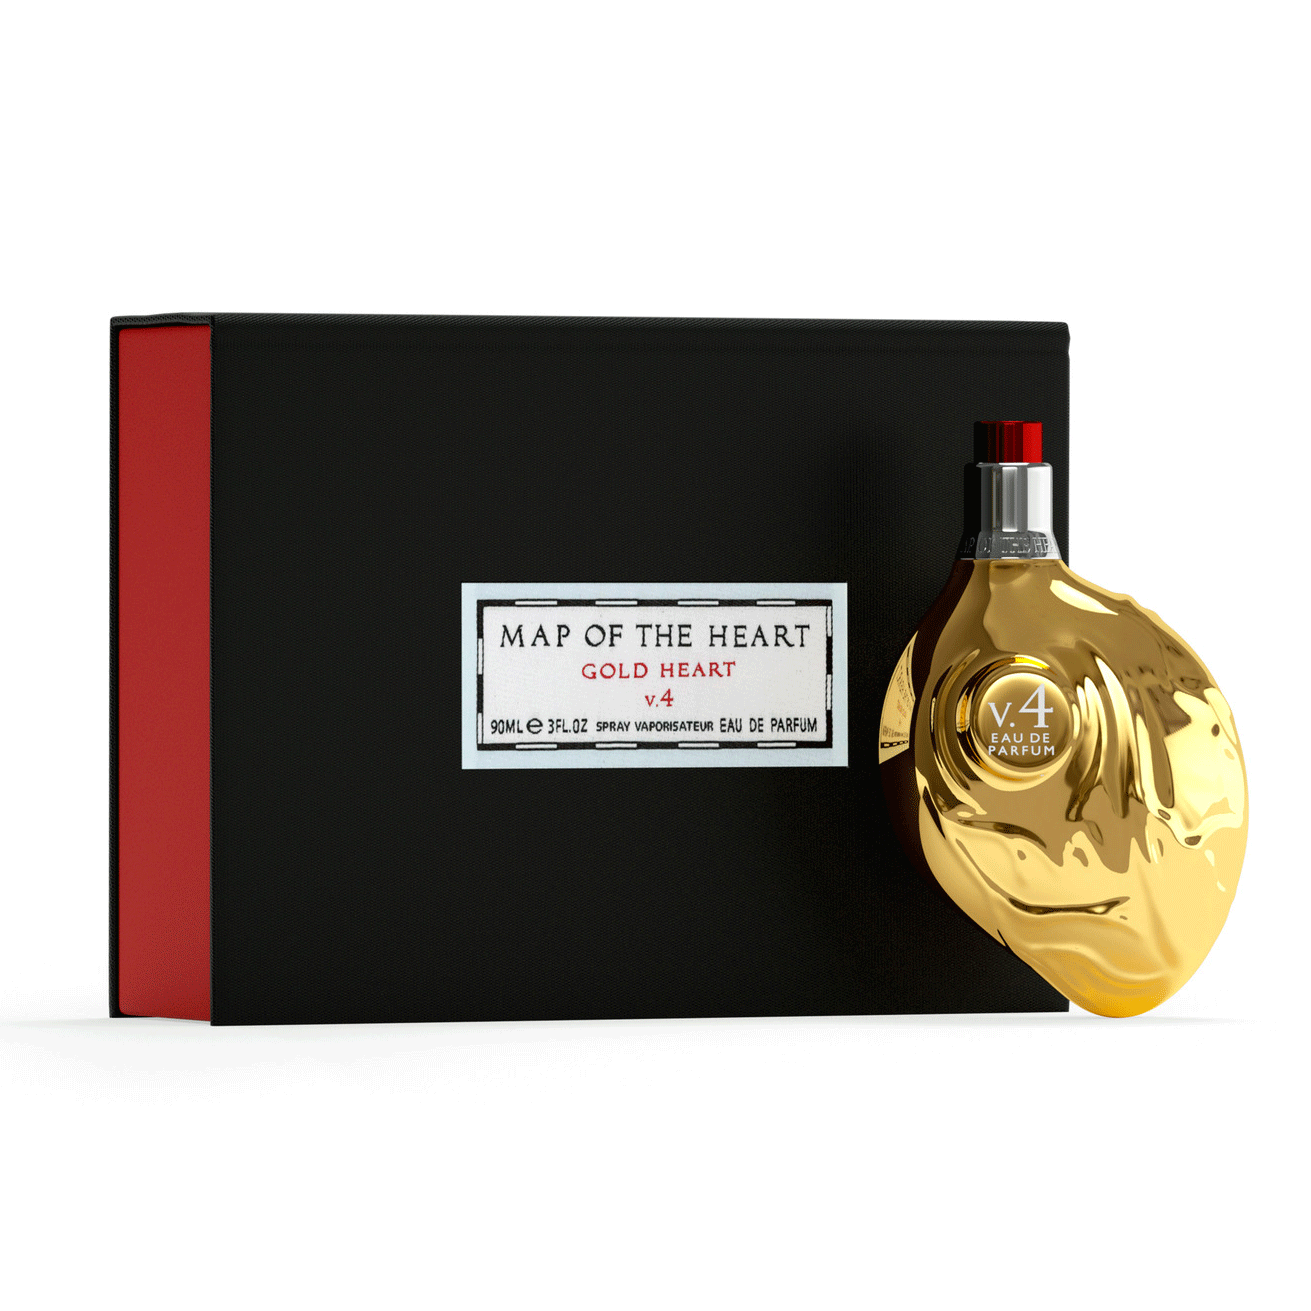 Map of the Heart Gold heart perfume V.4 and gift box Map of the Heart Gold heart perfume V.4 anatomical heart bottle